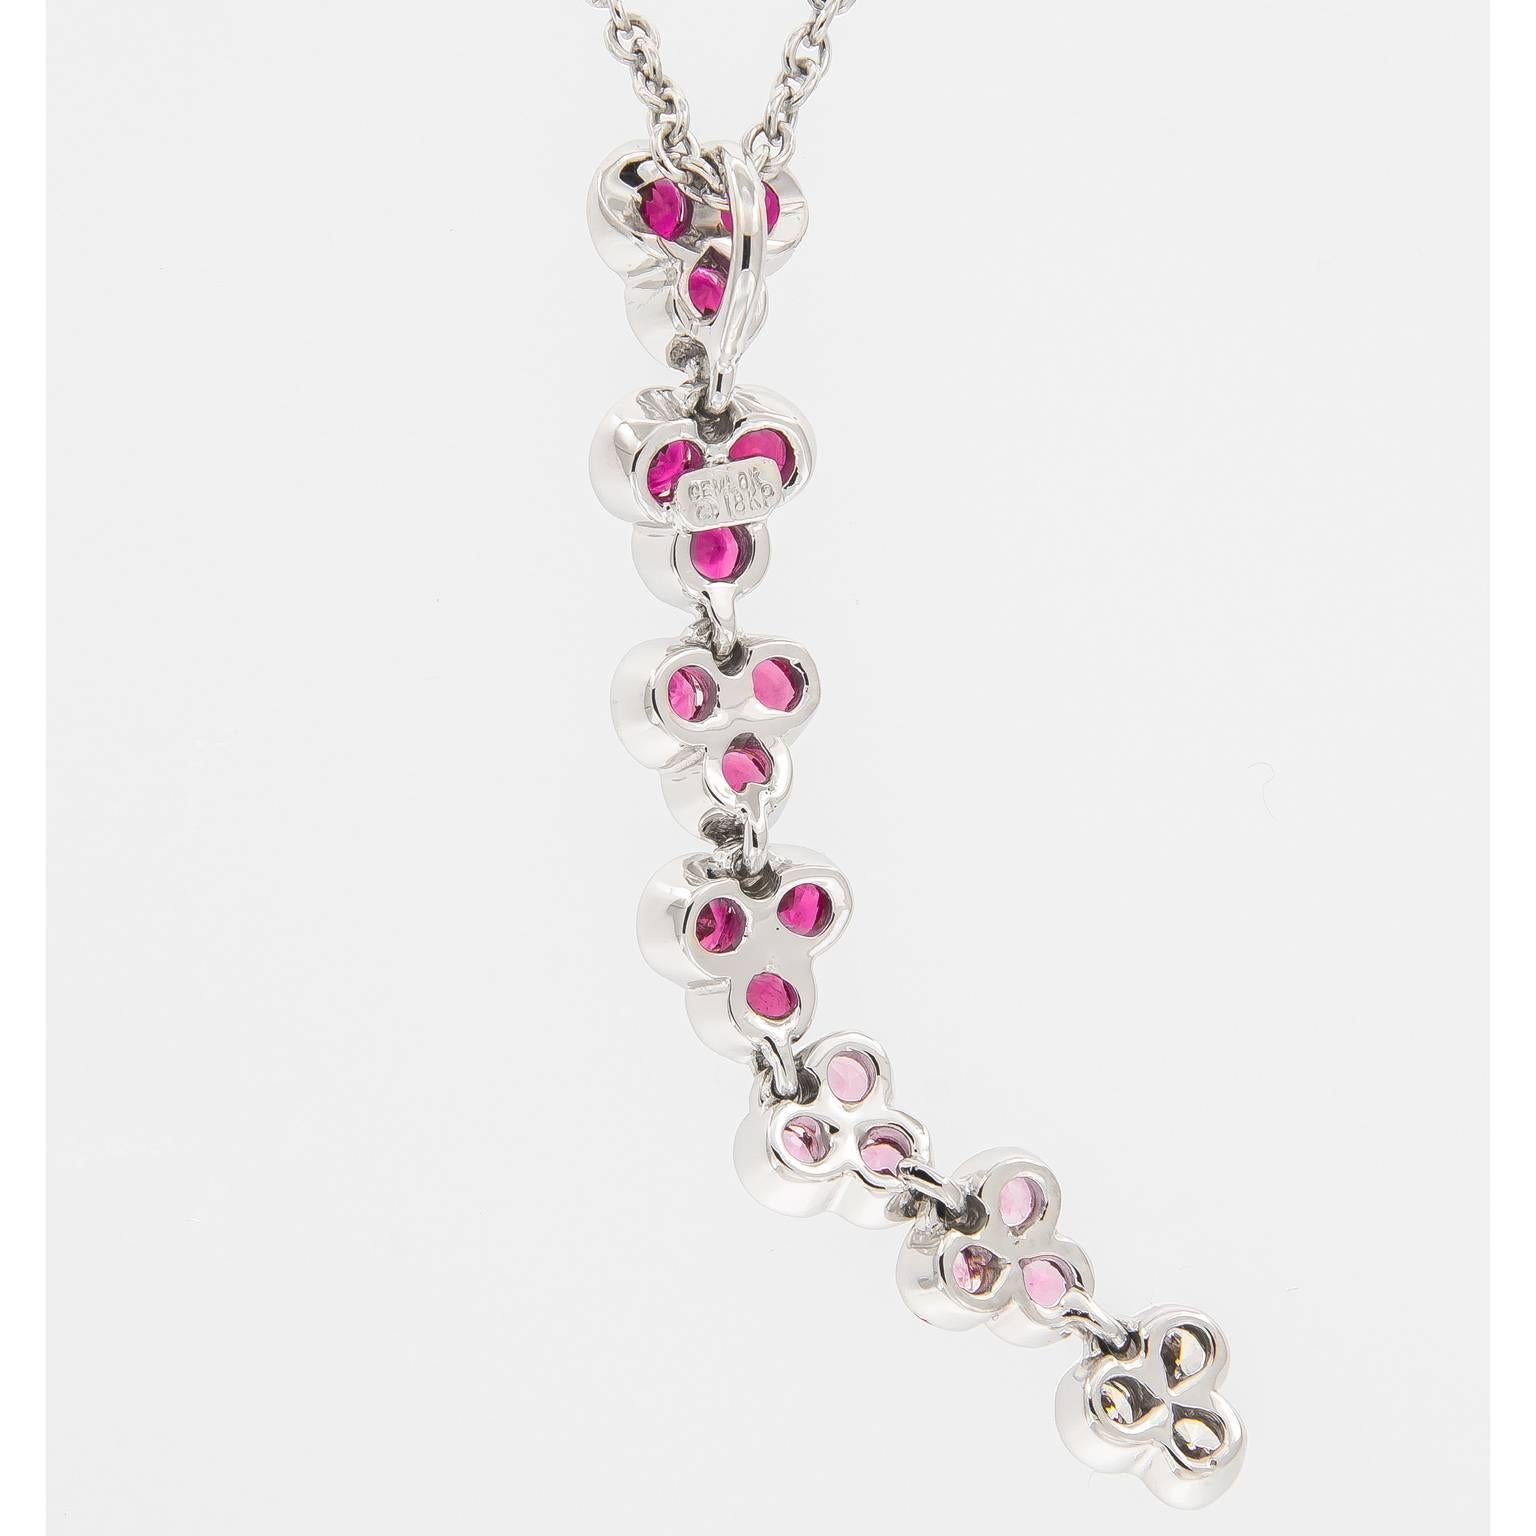 Jean Vitau earrings from the Wisteria Collection are inspired by the vibrant beauty of nature. This lovely 18k white gold, pink sapphire and diamond drop necklace is a beautiful display of color and movement. The seven, three petal design is 1.7 in